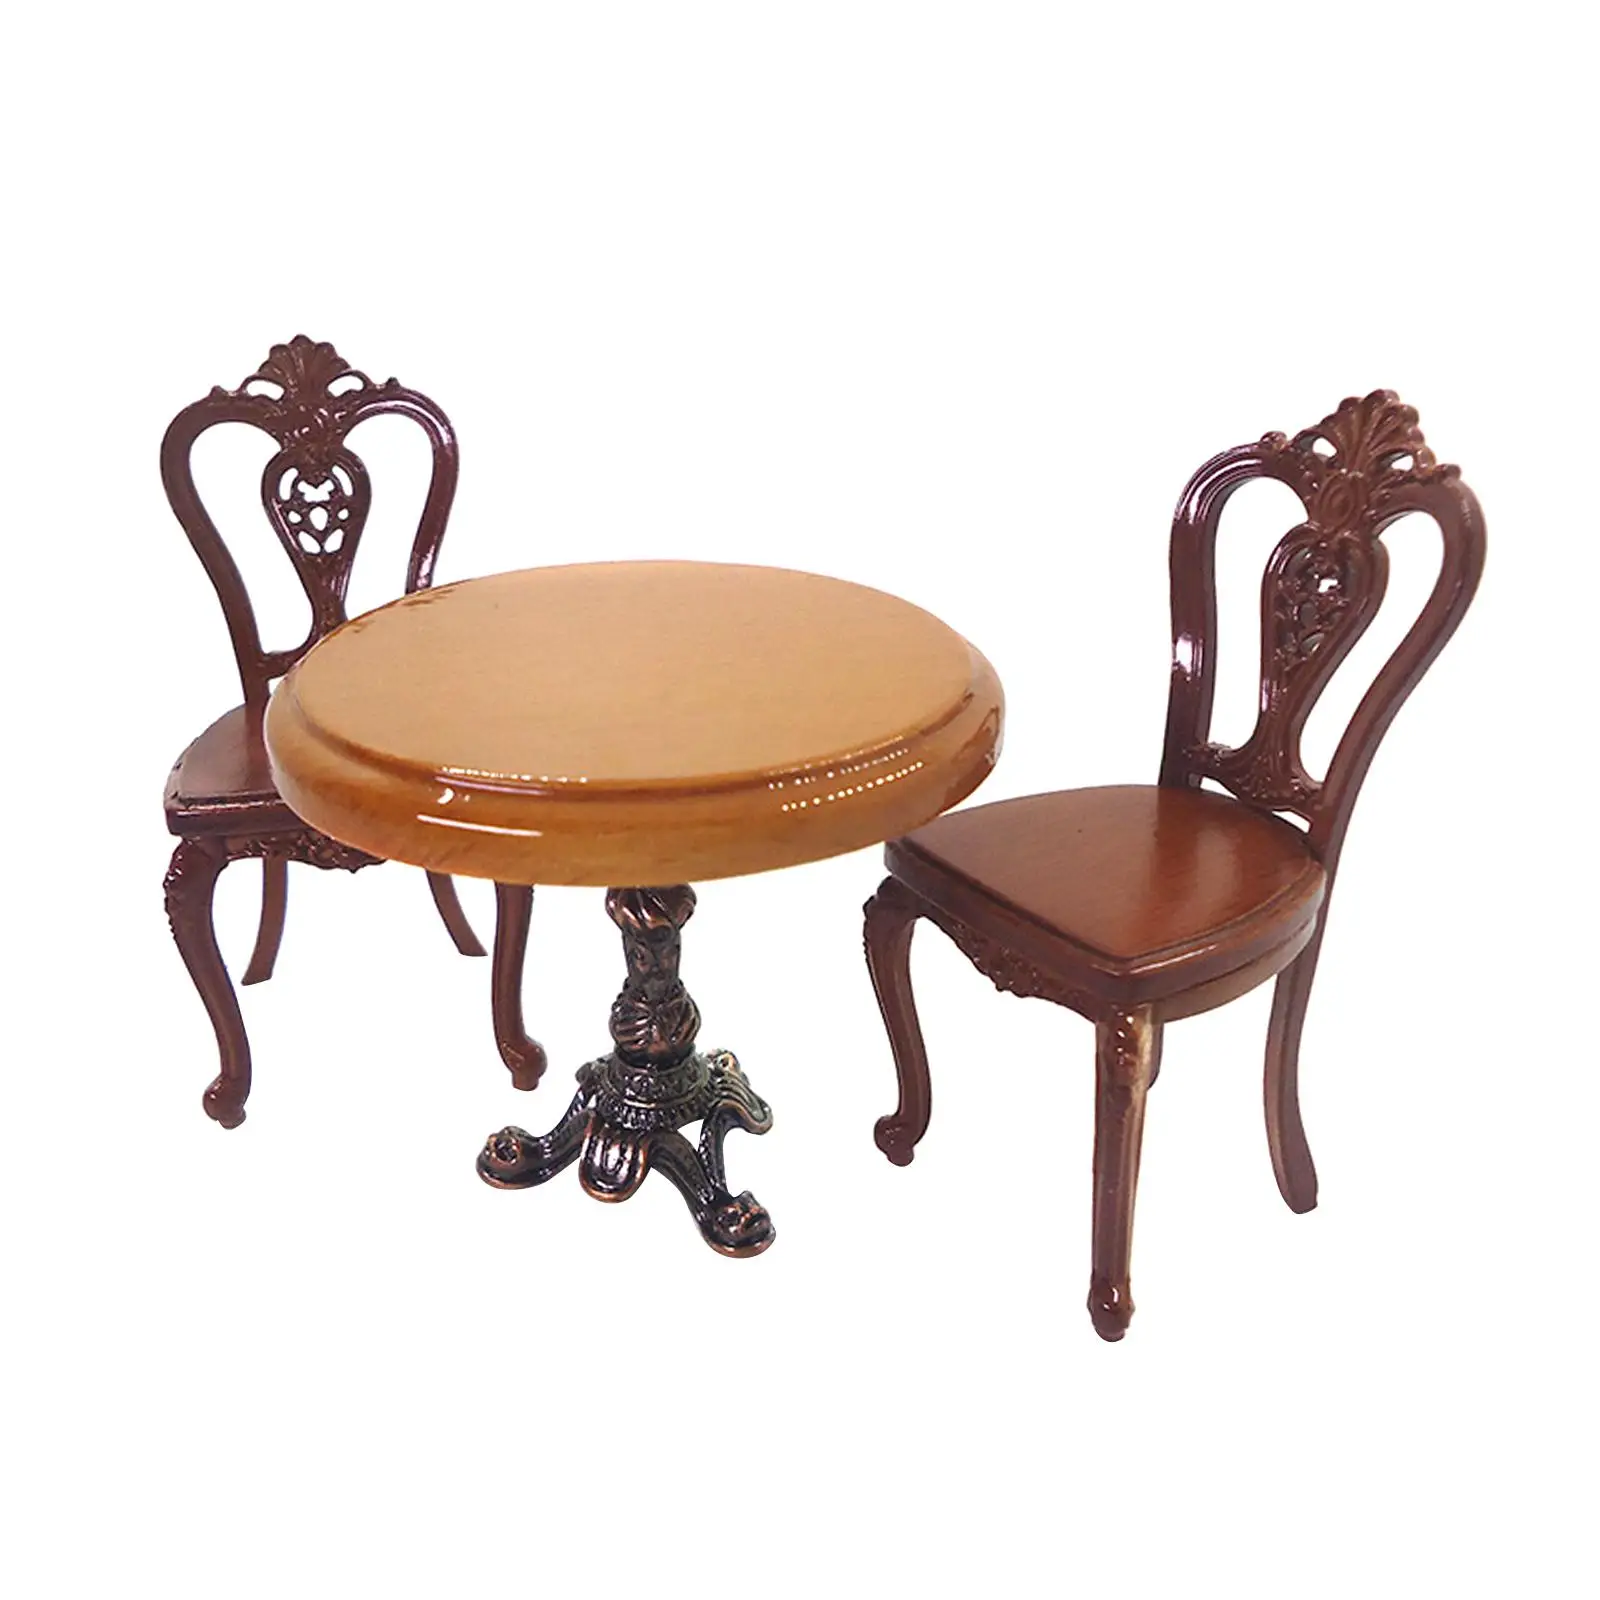 3Pcs 1:12 Mini Wooden Round Table and Chairs Model Accessories Toys Dining Room Living Room Scenery Supplies Decoration